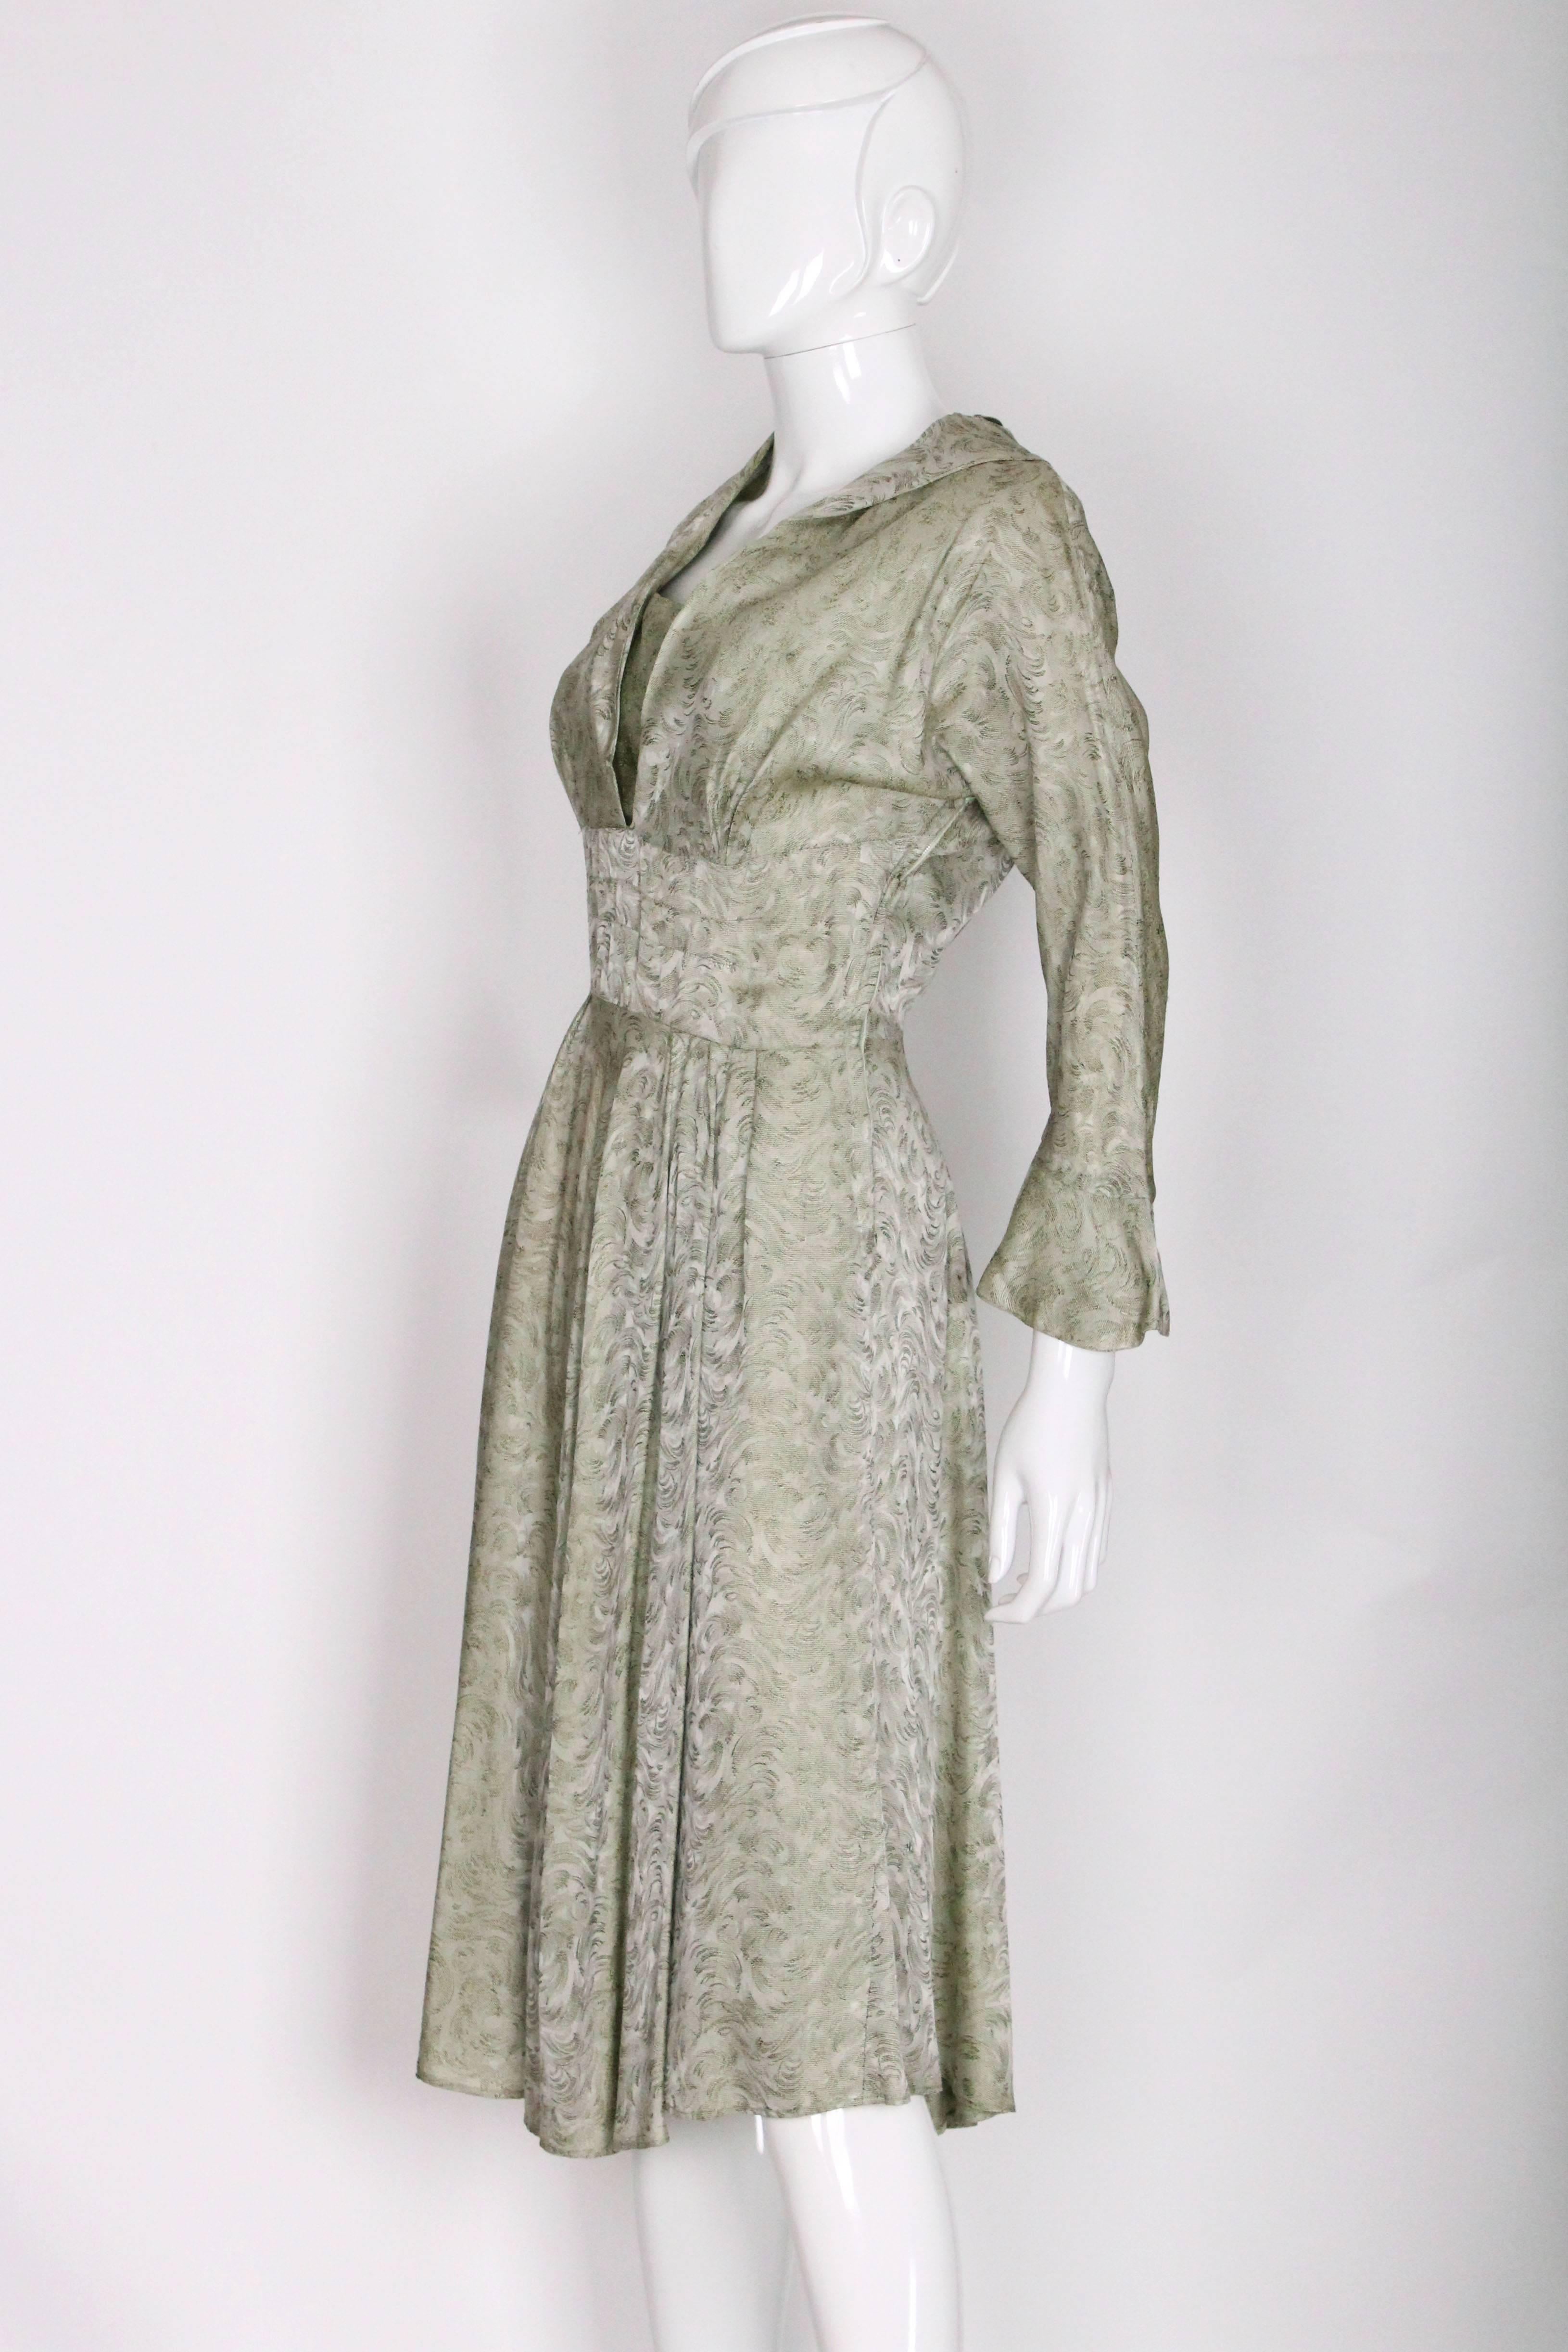 A cute day dress by Marion Michaels. In a light sage green jacquard and silk fabric with swirling design in tonal shades. This dress has a chic frilled collar and cuffs and a fullish skirt that is gathered from the waist band. There is a small side